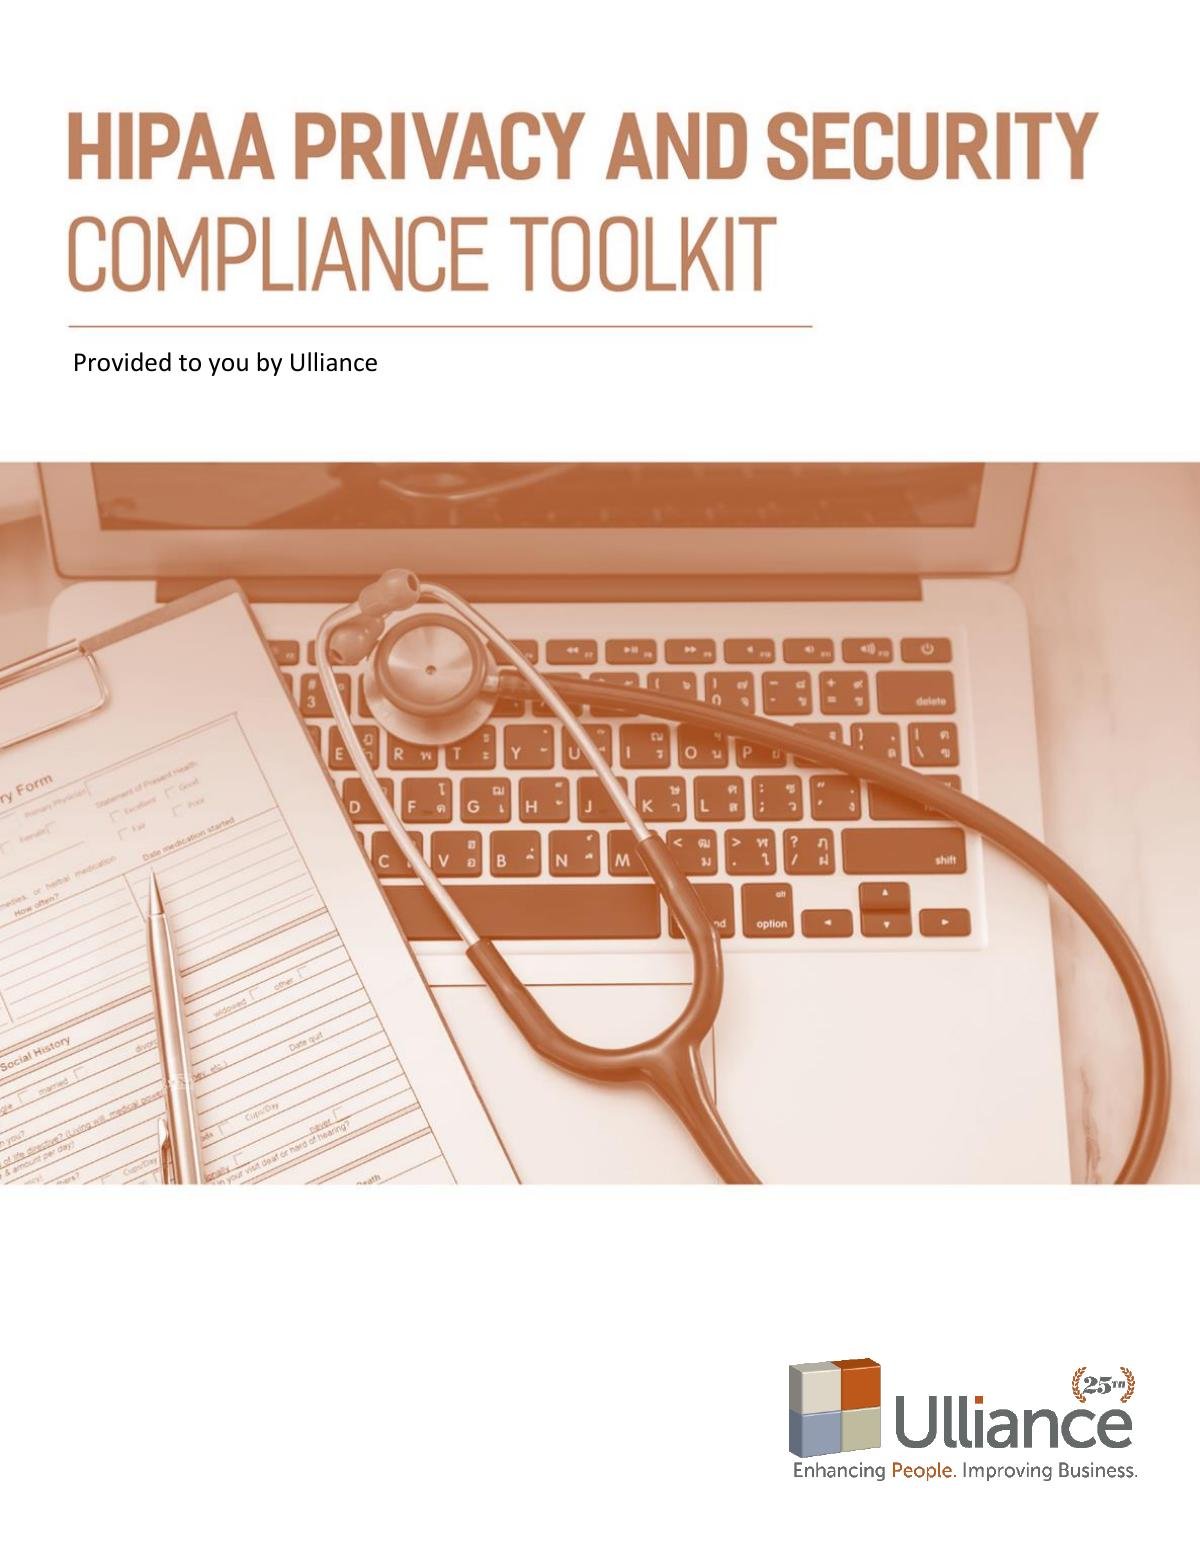 HIPAA Privacy and Security Compliance Toolkit